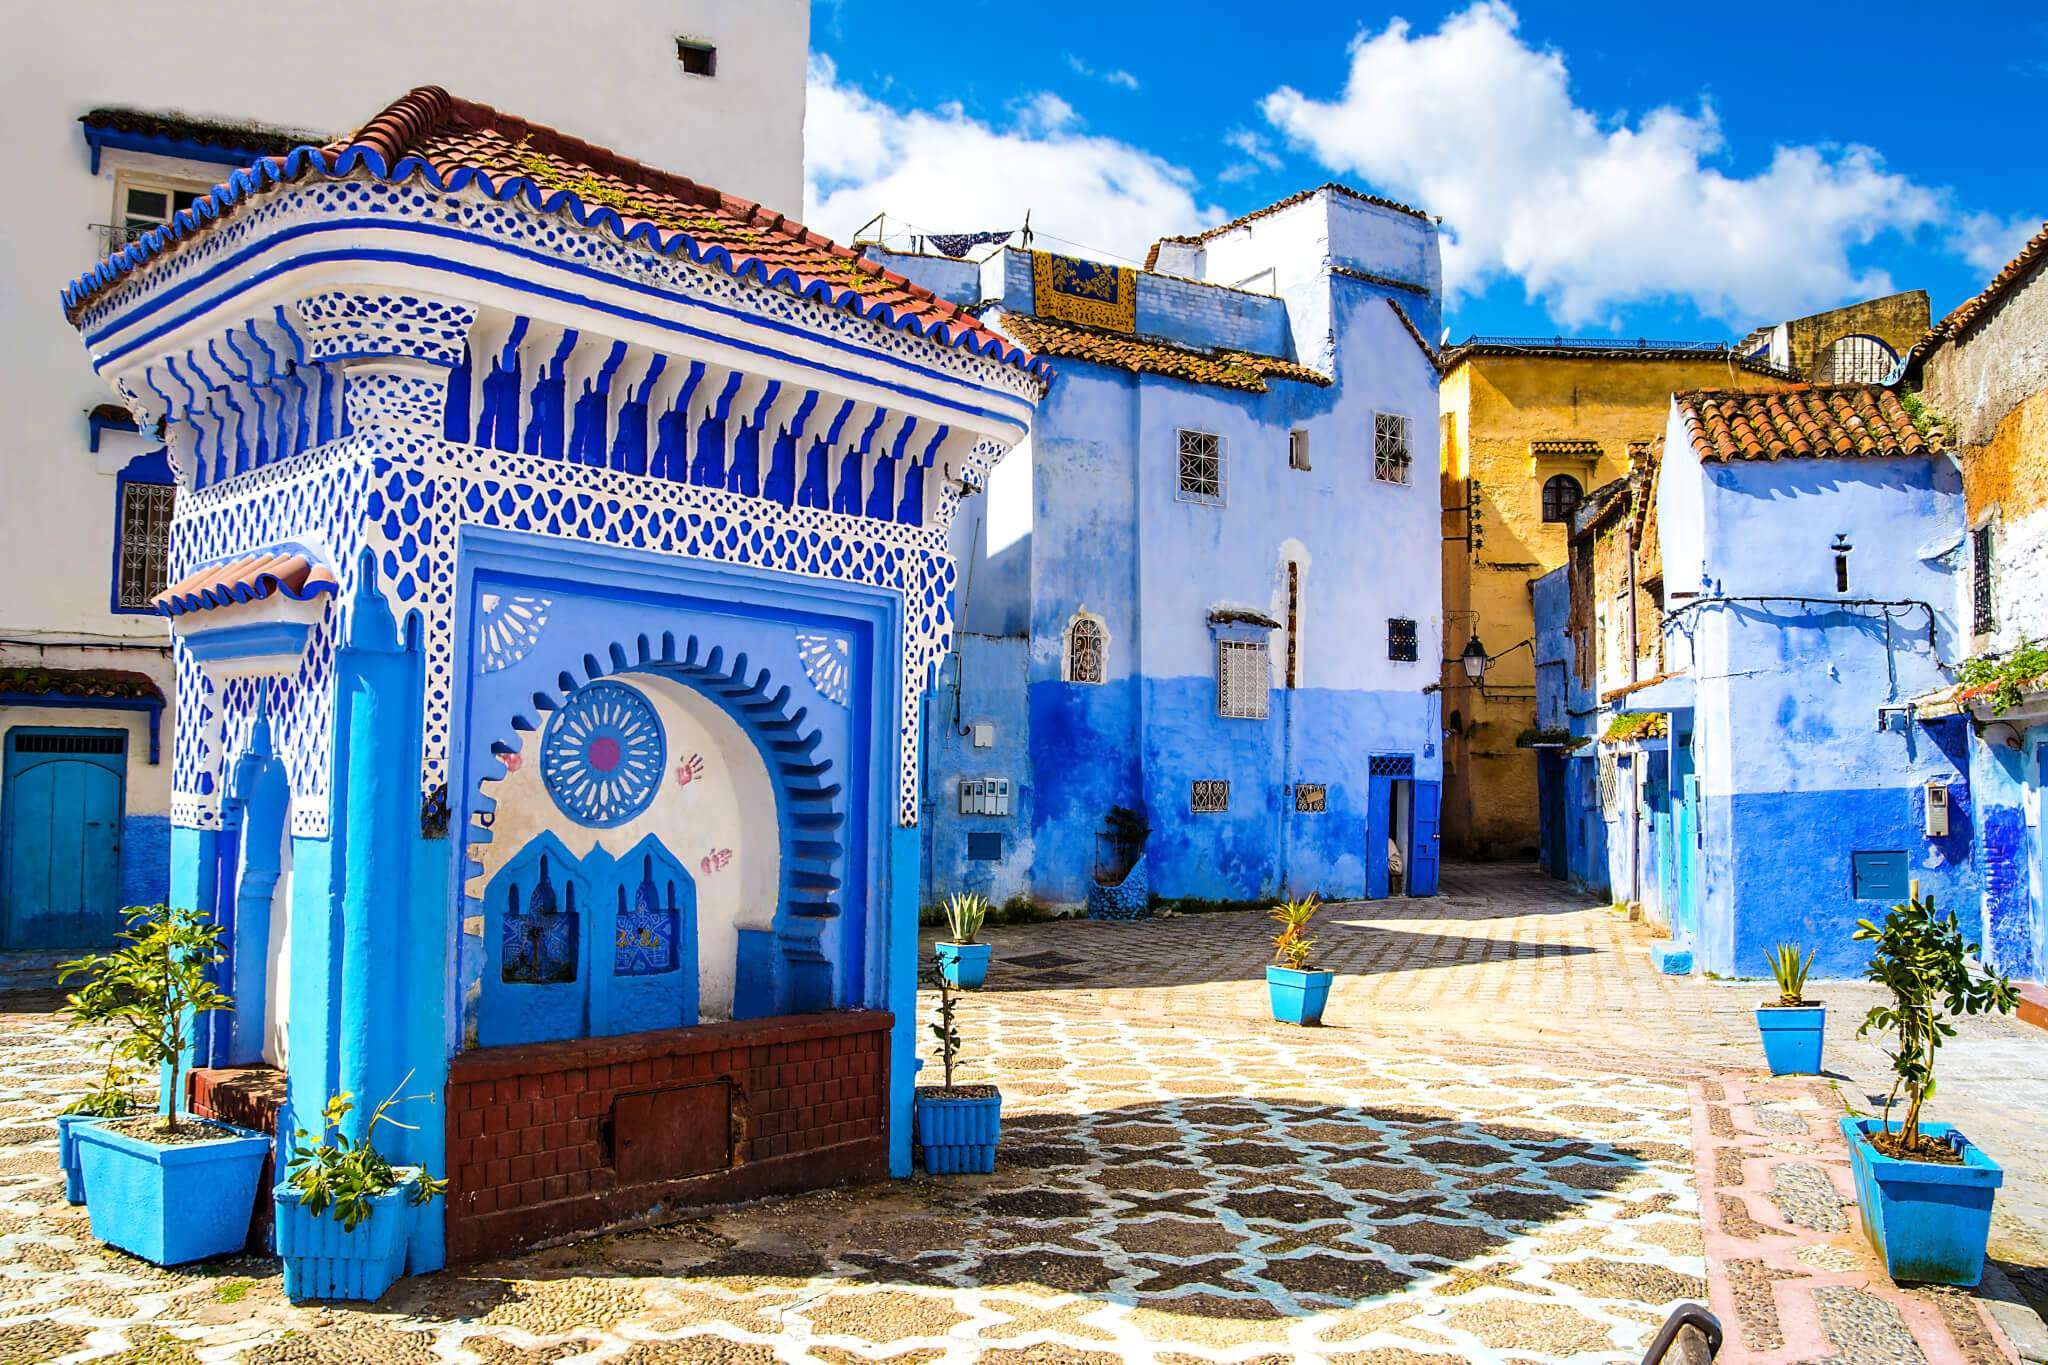 15 days Morocco shared group tour from Casablanca to discover the highlights of Morocco